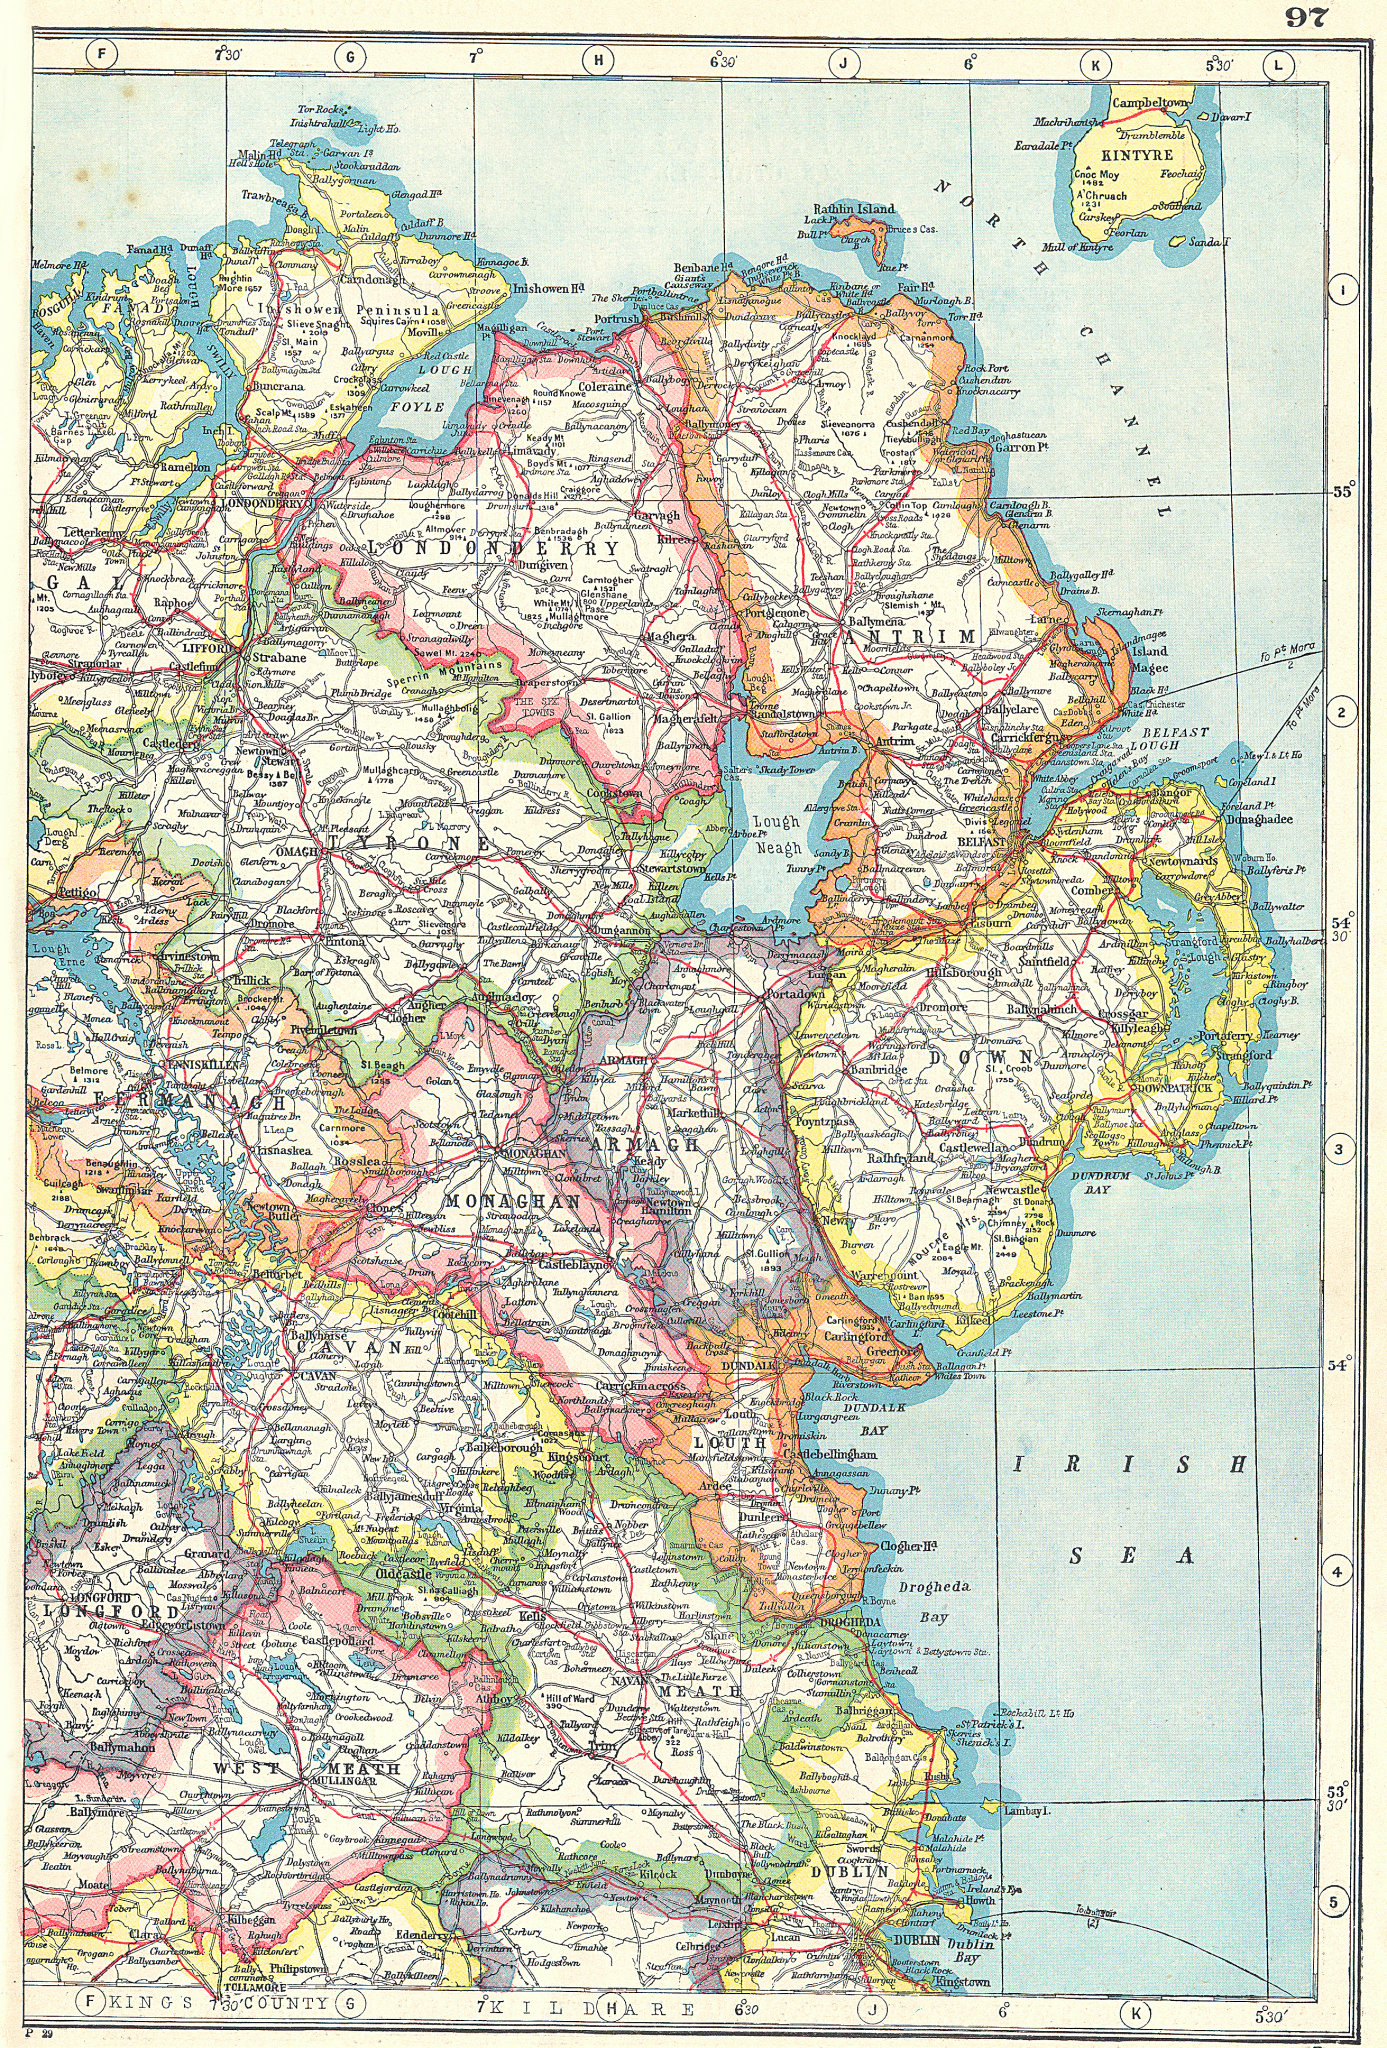 Associate Product IRELAND NORTH EAST. Ulster Antrim Down Londonderry Tyrone Armagh etc 1920 map